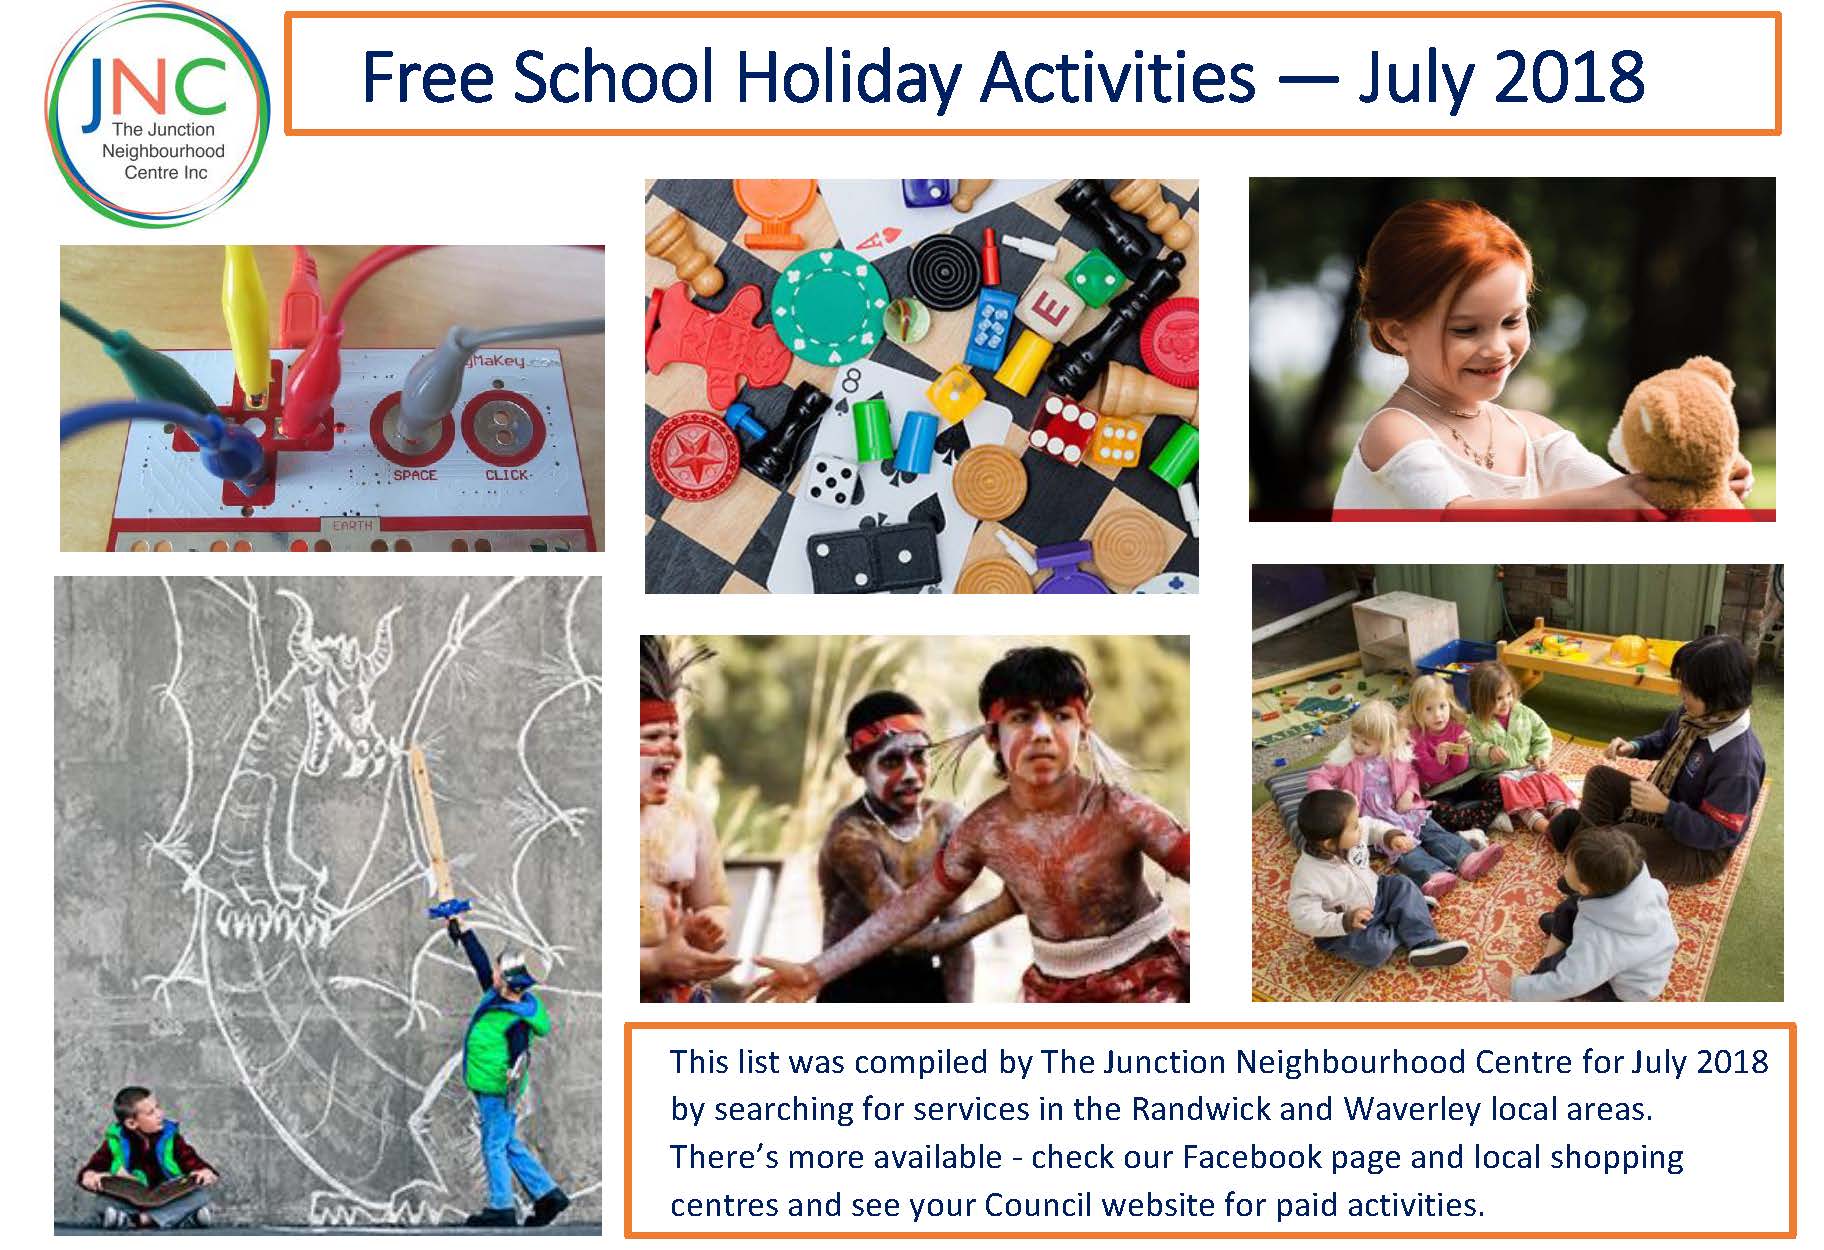 poster showing pictures of some of thefree school holiday activities listed